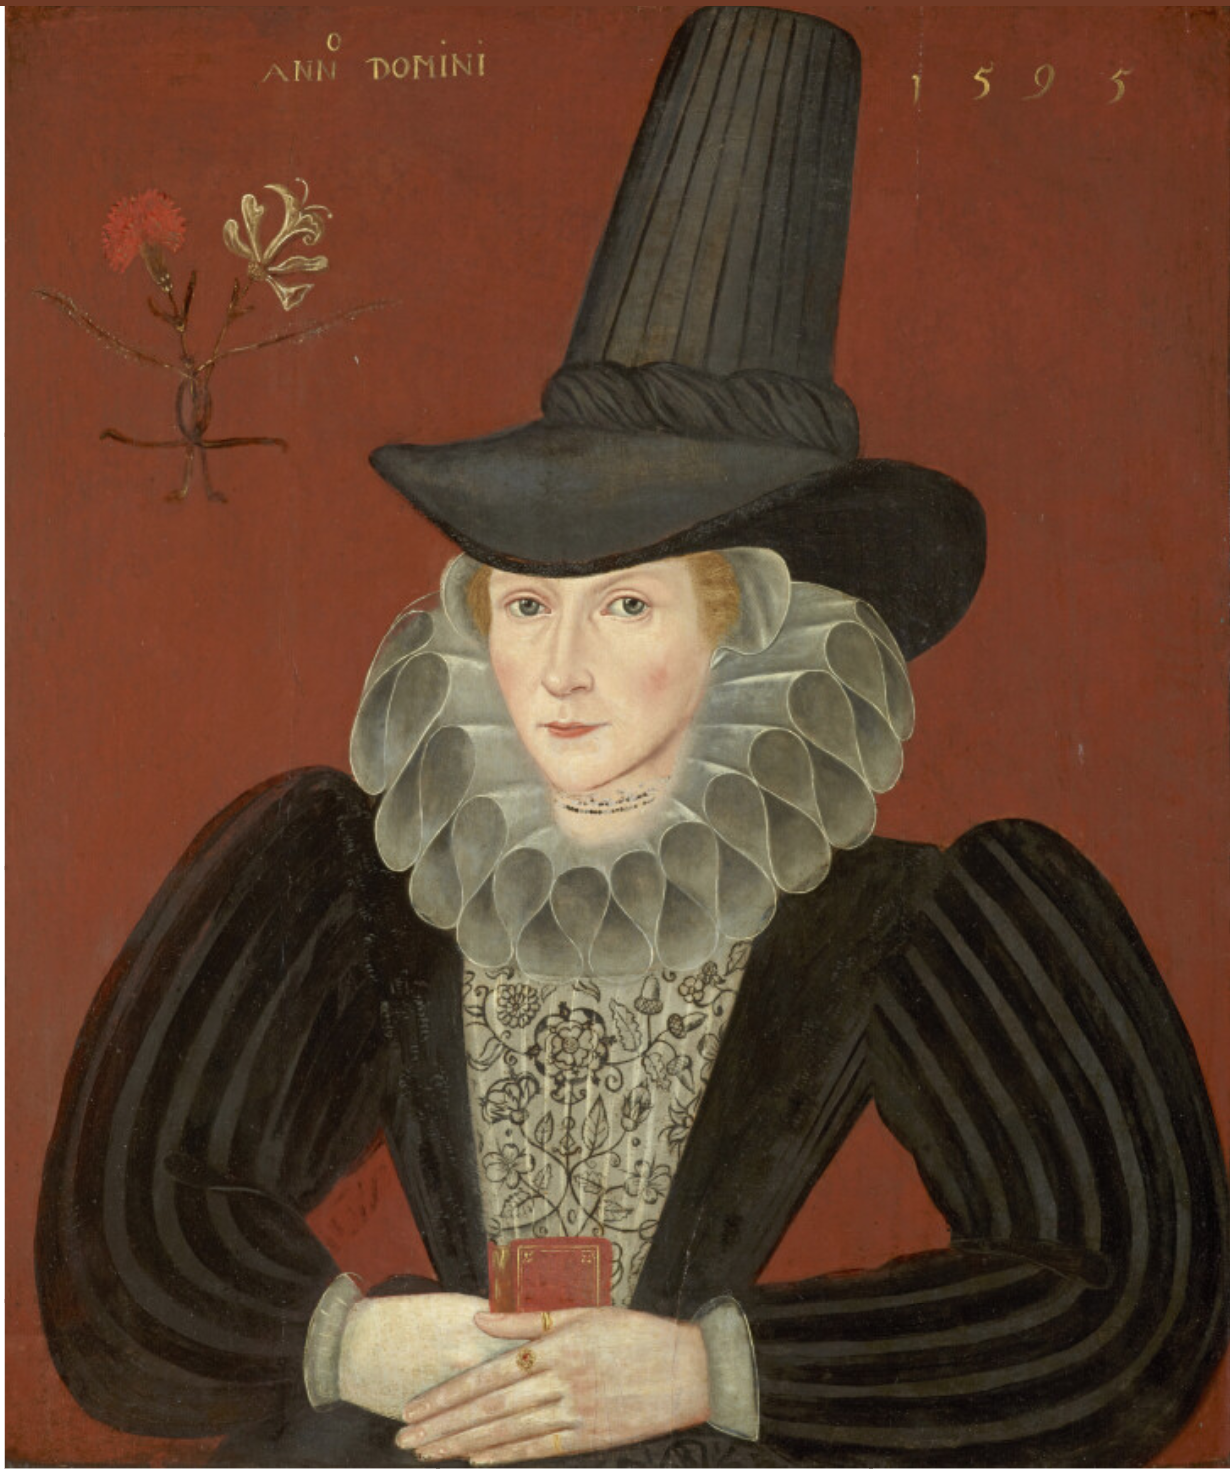 A painted portrait of Esther Inglis, by an unknown artist, painted in 1595. Image shows a woman in three-quarters profile, wearing a black dress with an embroidered panel, a ruff around her neck, and a tall black hat. Her hands are folded over a small red book. The background of the painting is a dark red, with a design of intertwined carnation and honeysuckle stems. The words ANNO DOMINI 1595 are written in gold at the top of the painting.